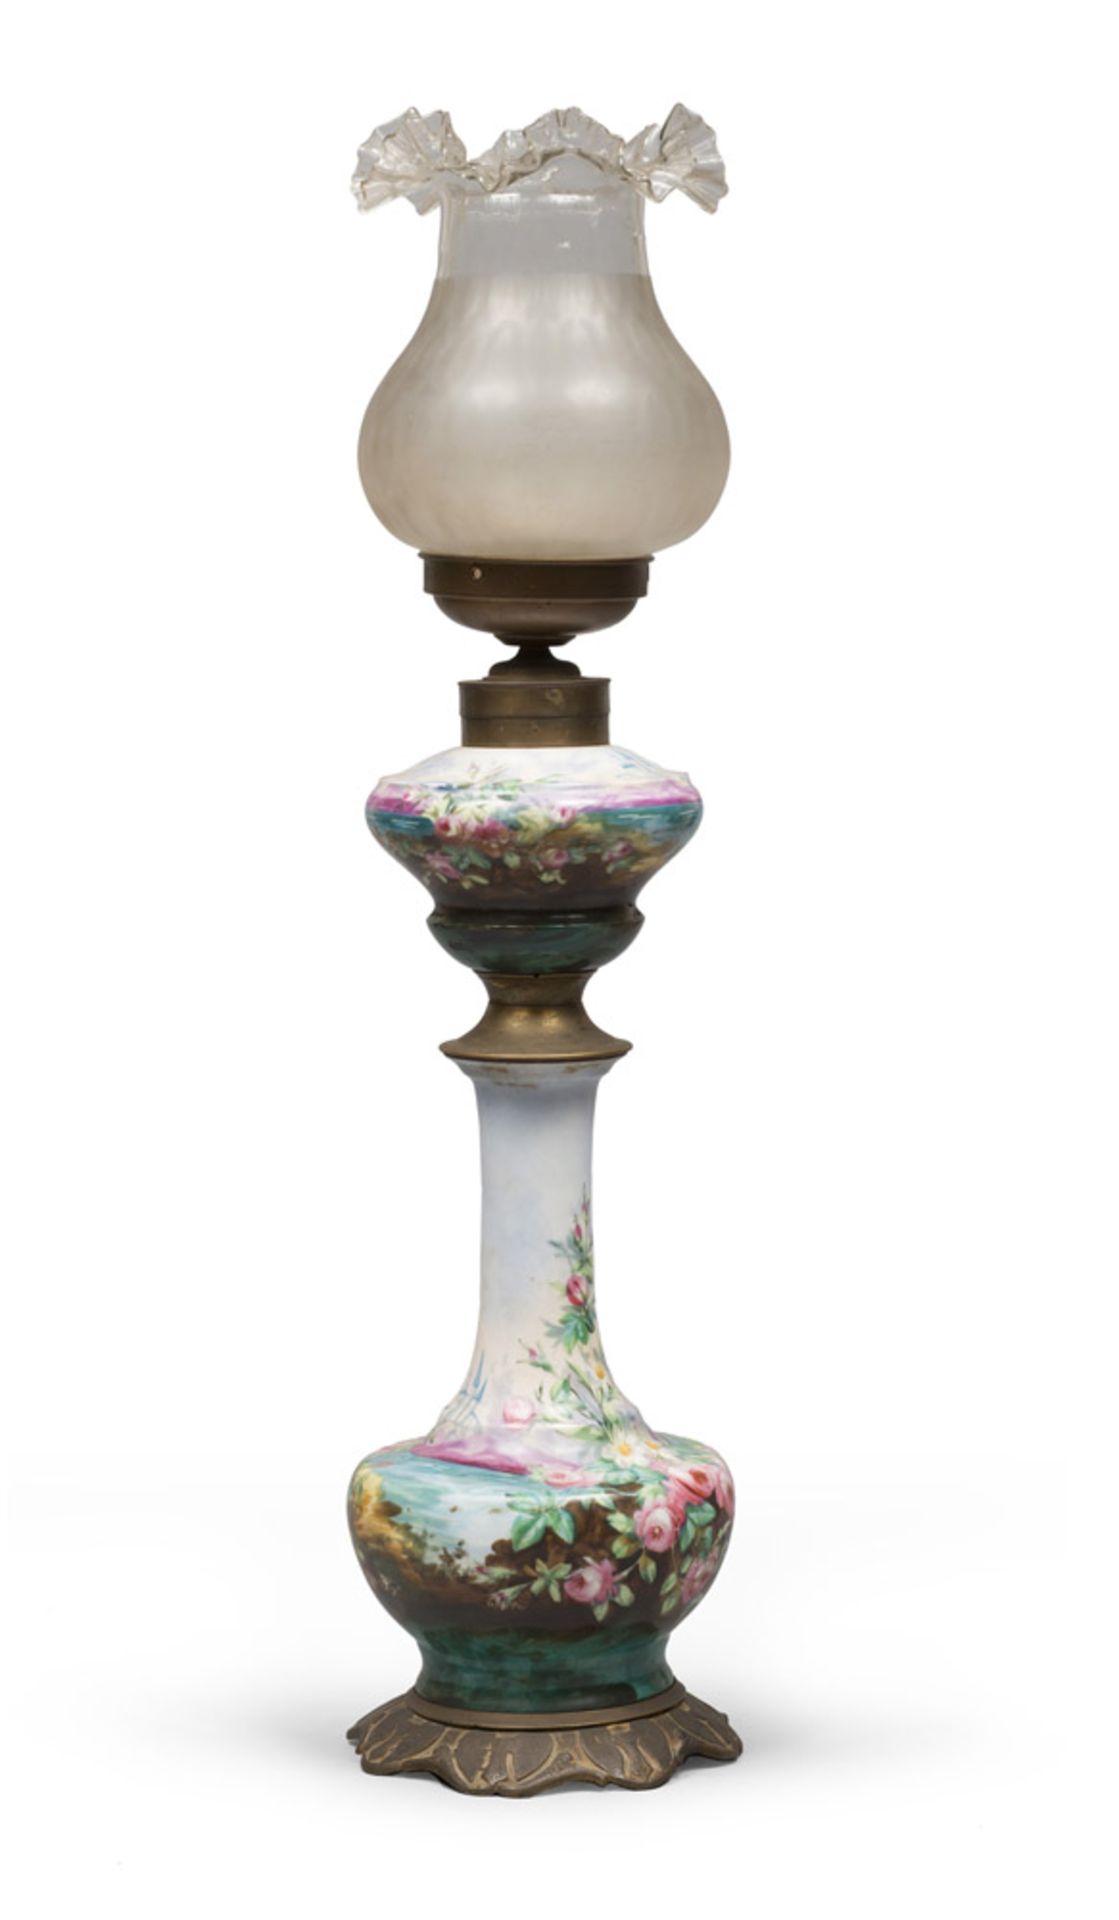 PORCELAIN LIGHT, LATE 19TH CENTURY with gilded metal base. h. cm. 67. LUME IN PORCELLANA, FINE XIX